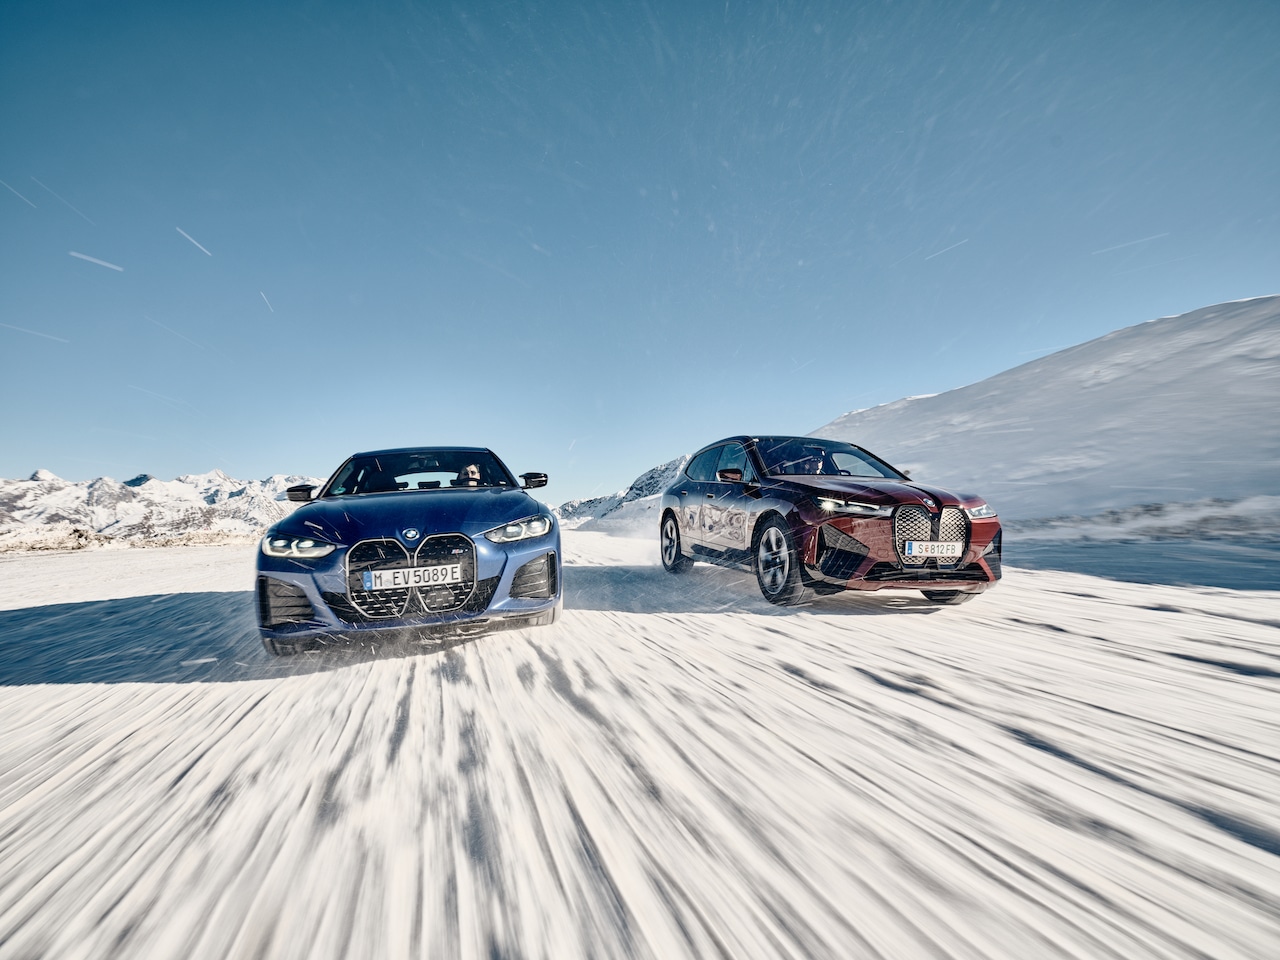 The first fully electric BMW xDrive system in the BMW iX and the BMW i4 M50